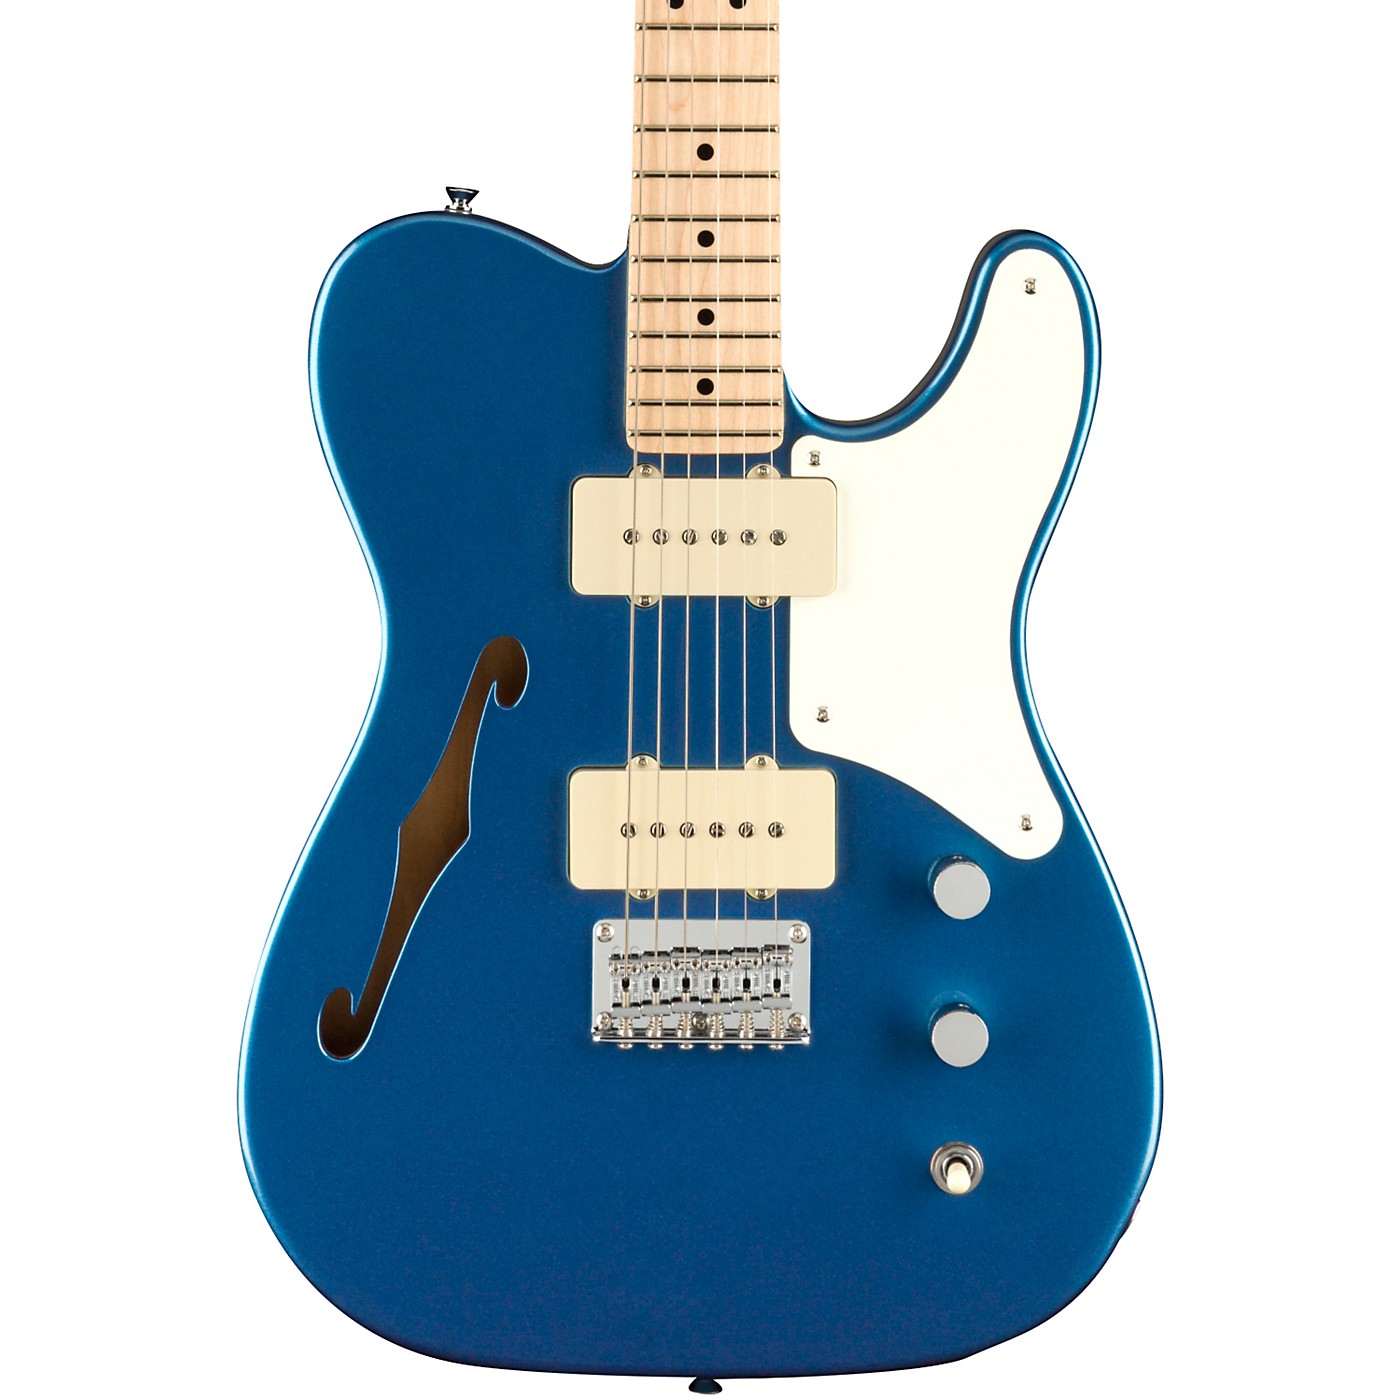 Squier Paranormal Series Cabronita Telecaster Thinline Electric Guitar With Maple Fingerboard thumbnail